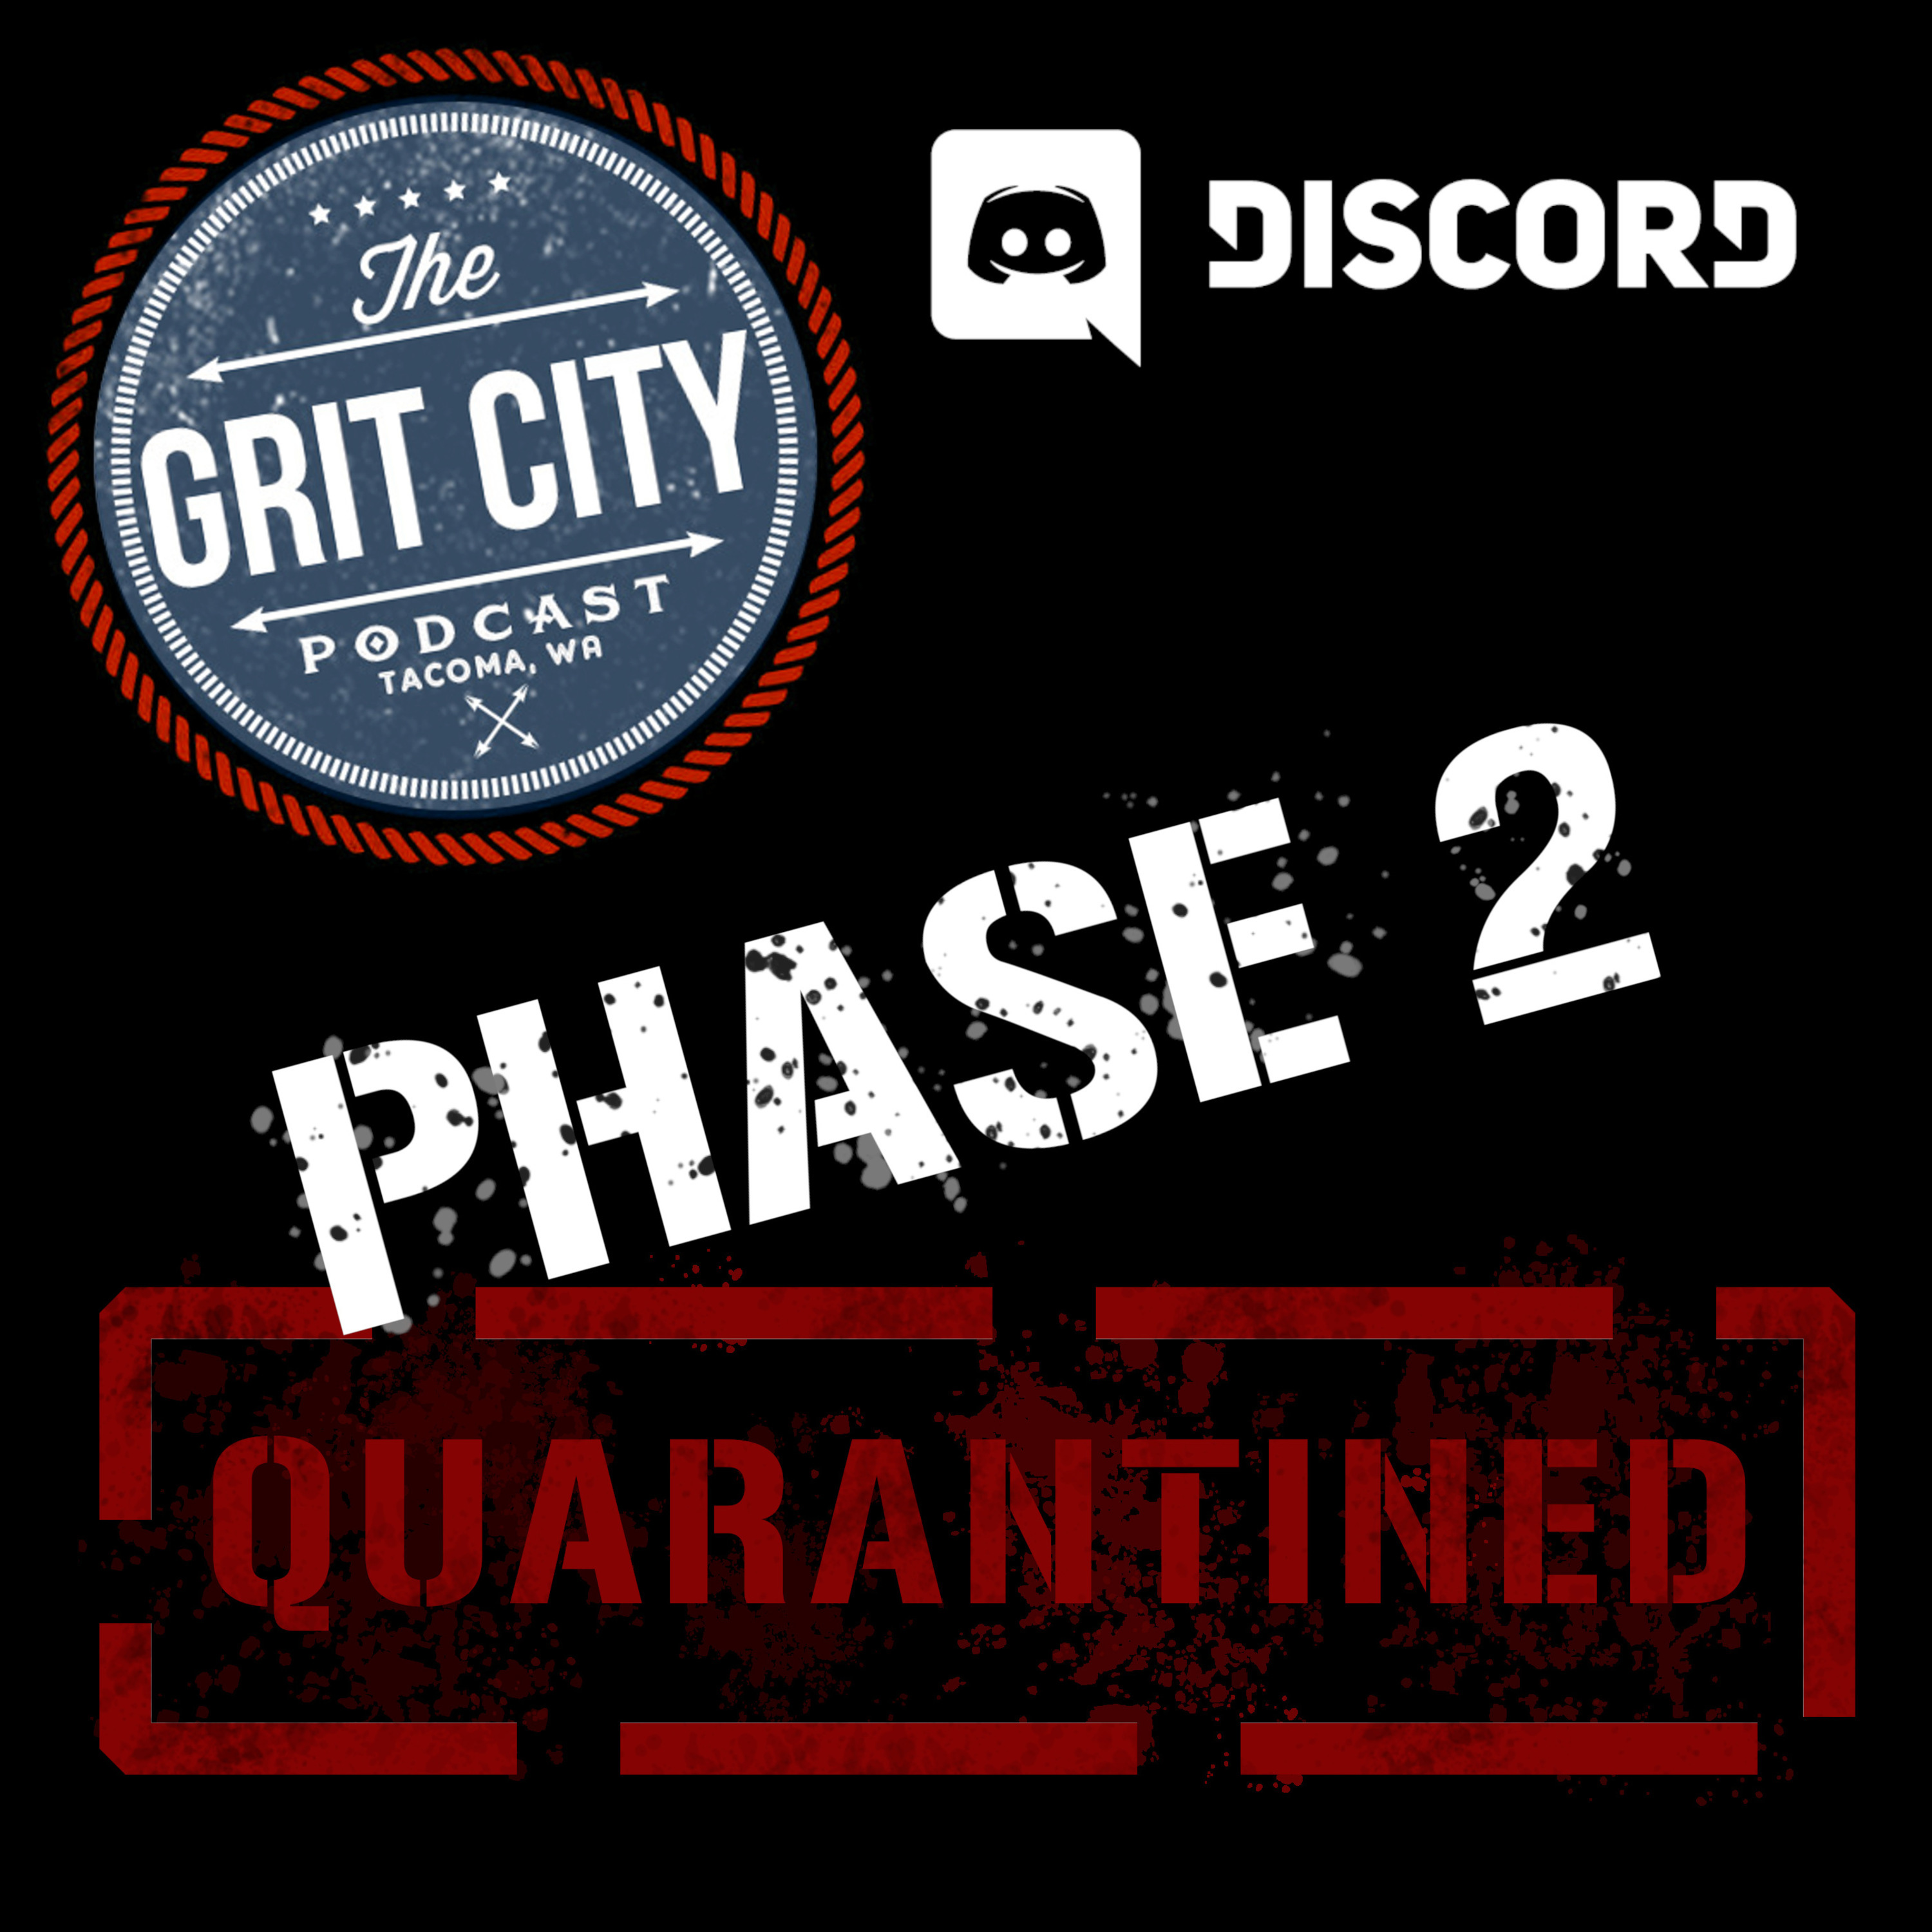 Quarantined 10: Not A Drill! We Have Entered Phase 2!